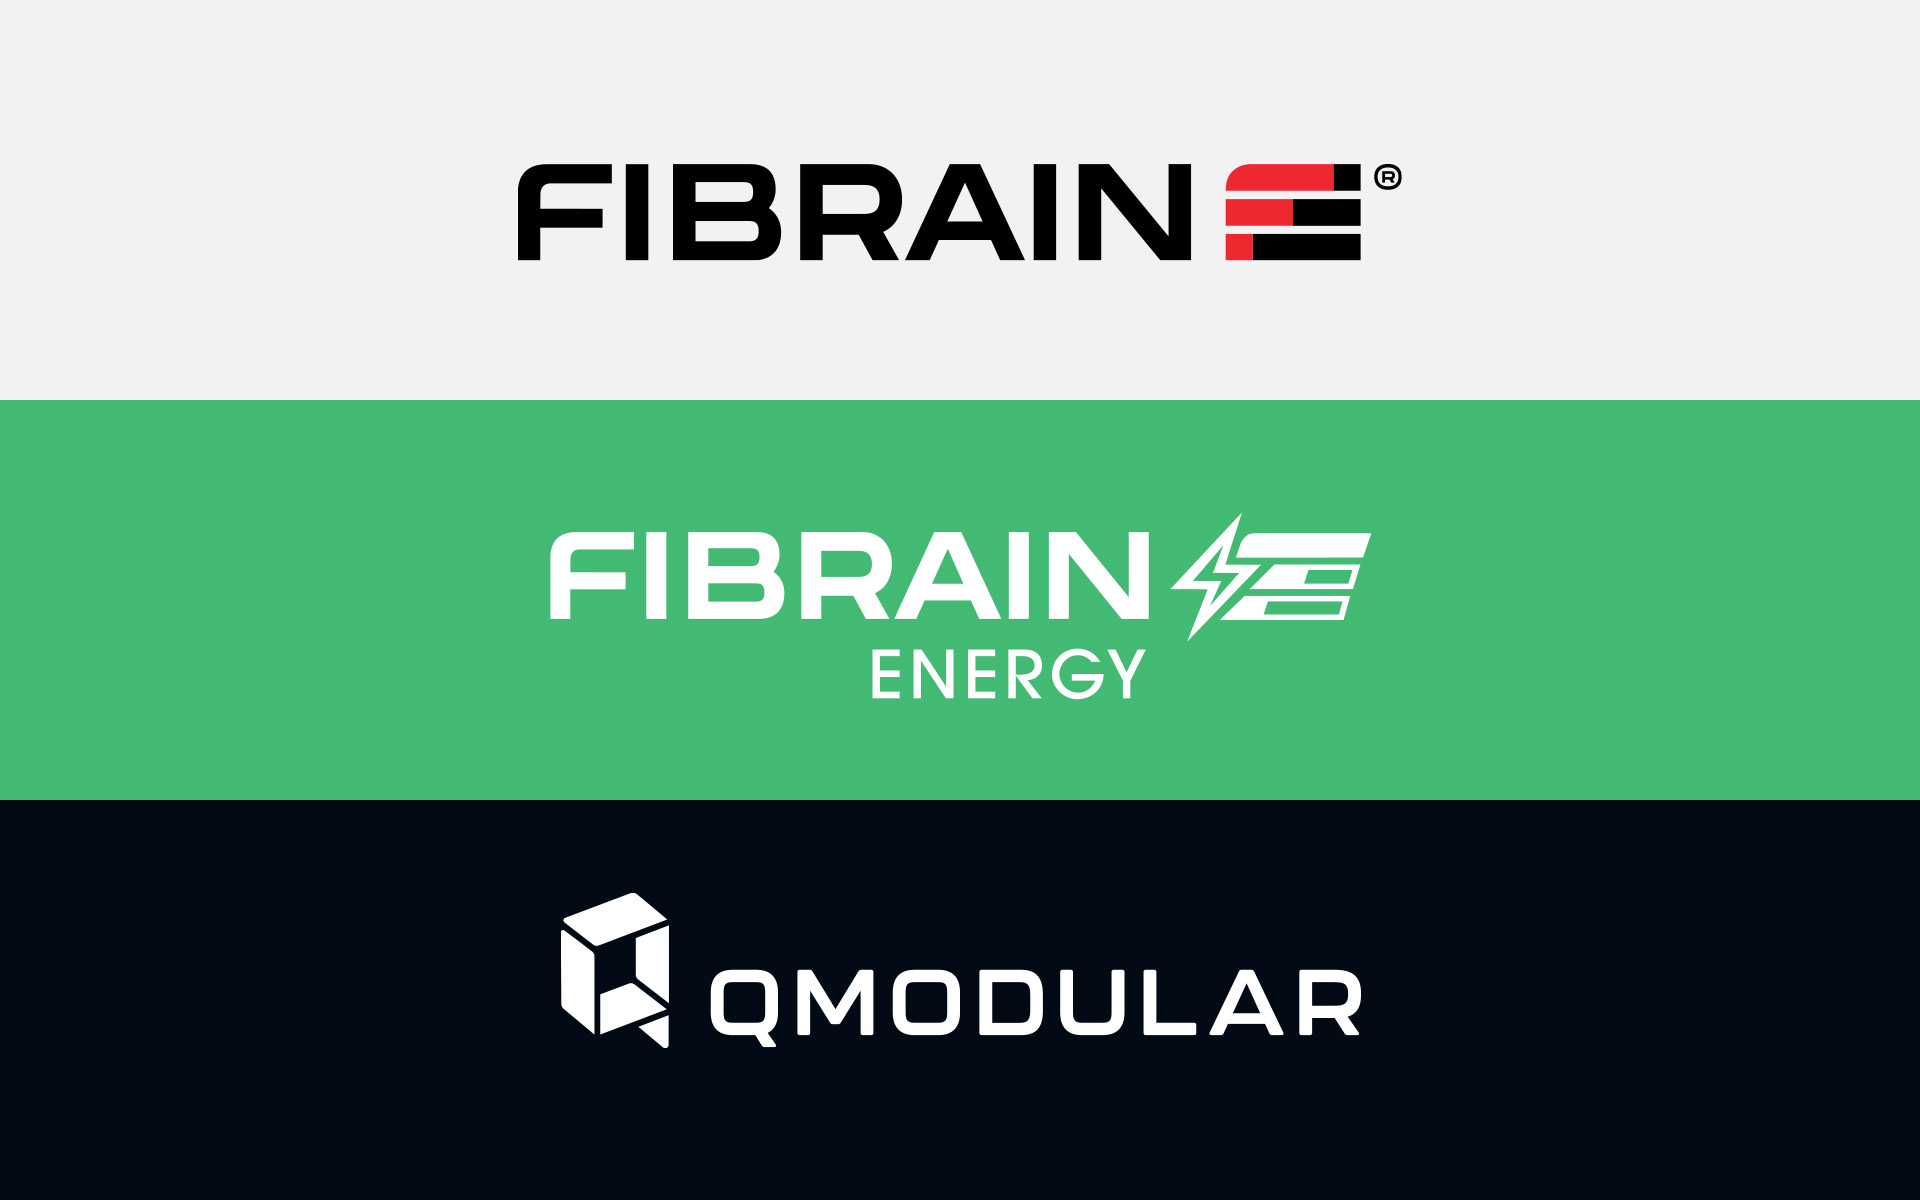 FIBRAIN partners with QMODULAR to create energy-efficient homes and large-scale modular buildings charged with green energy.